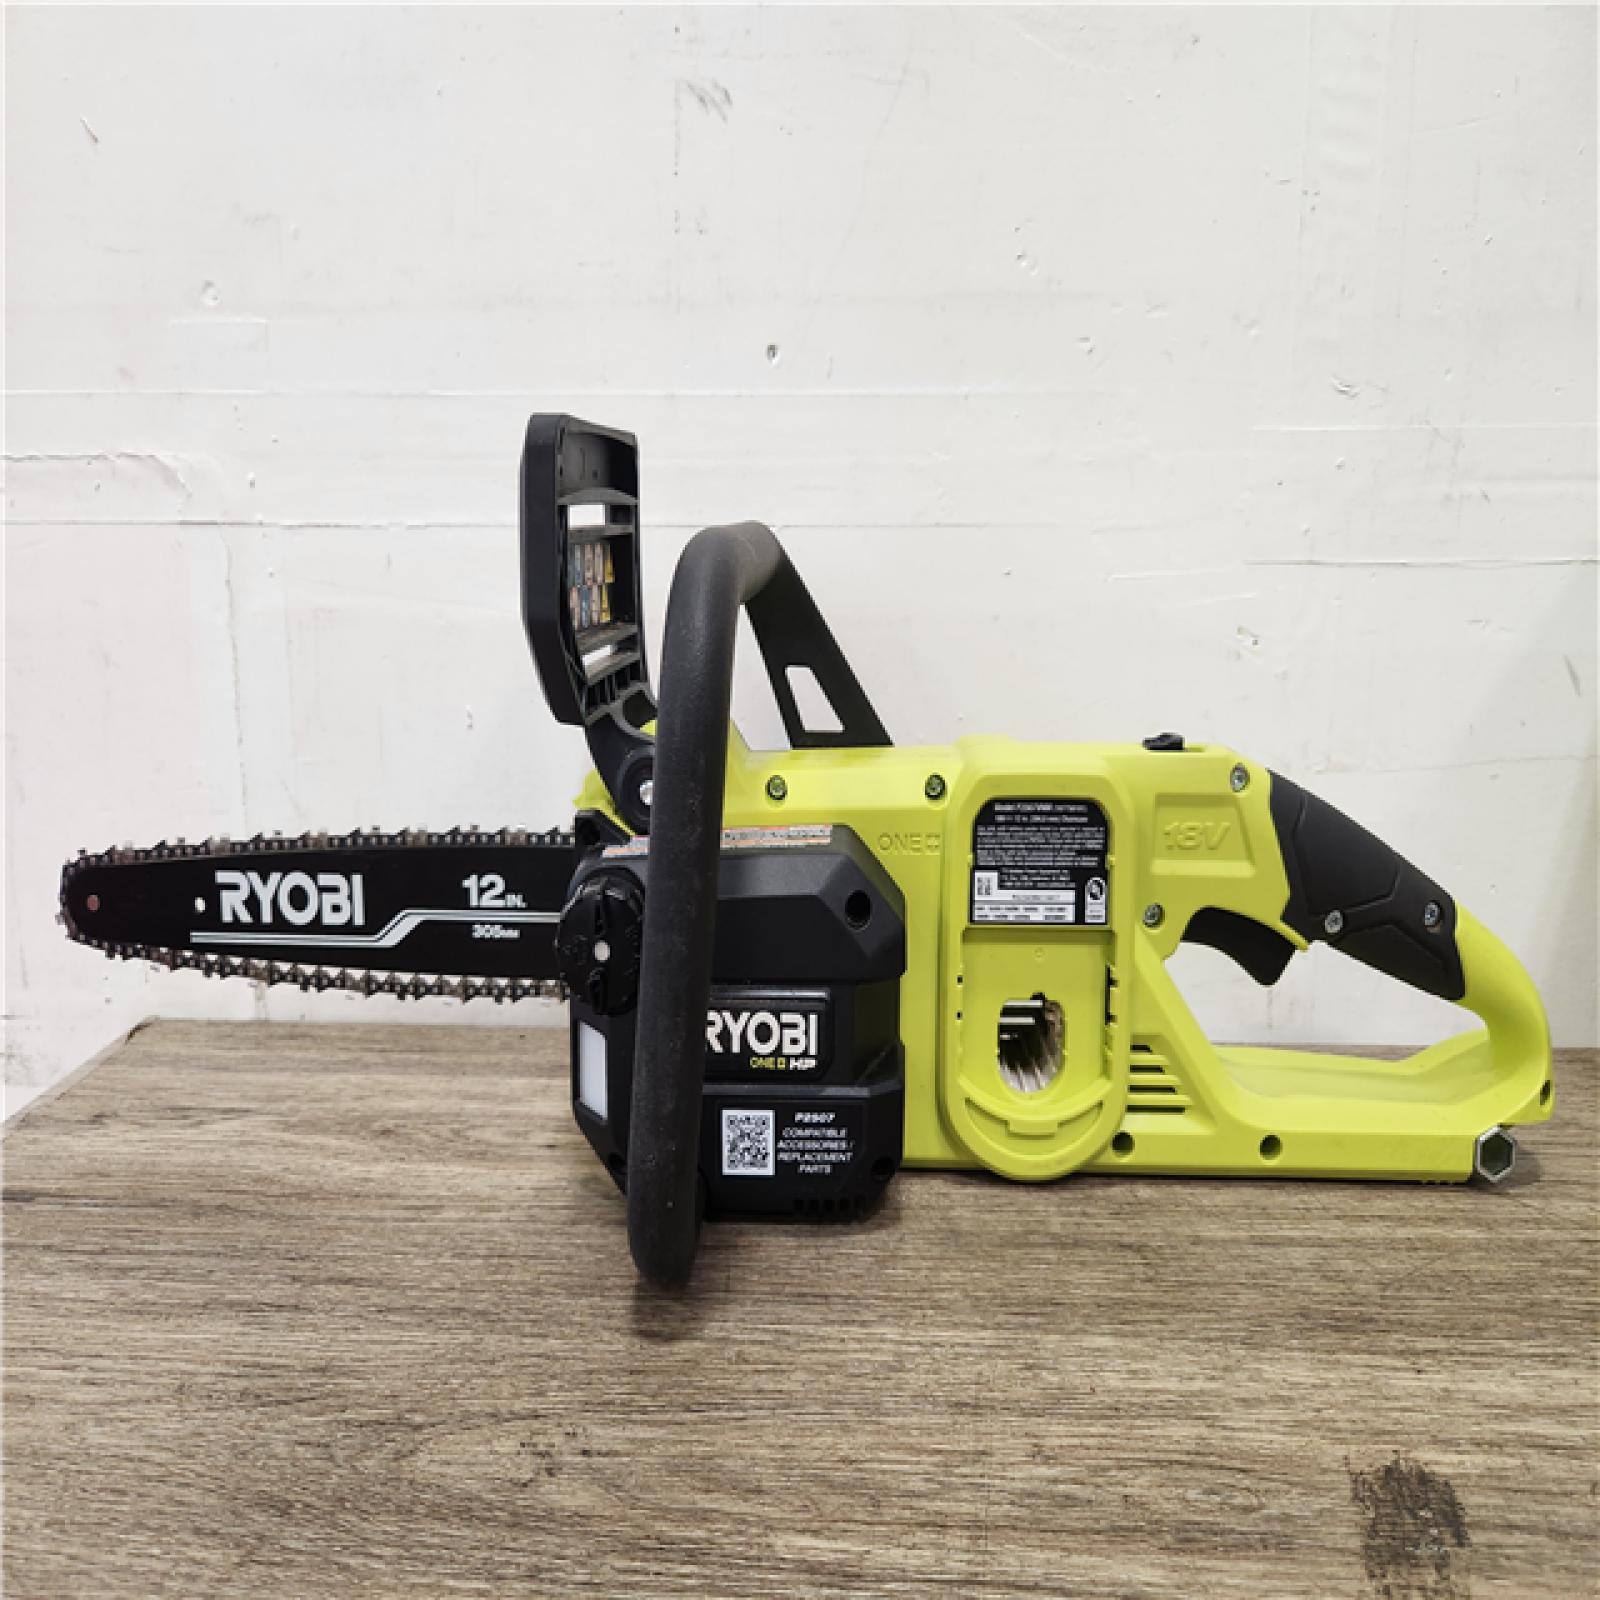 Phoenix Location NEW RYOBI ONE+ HP 18V Brushless Whisper Series 12 in. Battery Chainsaw (Tool Only)